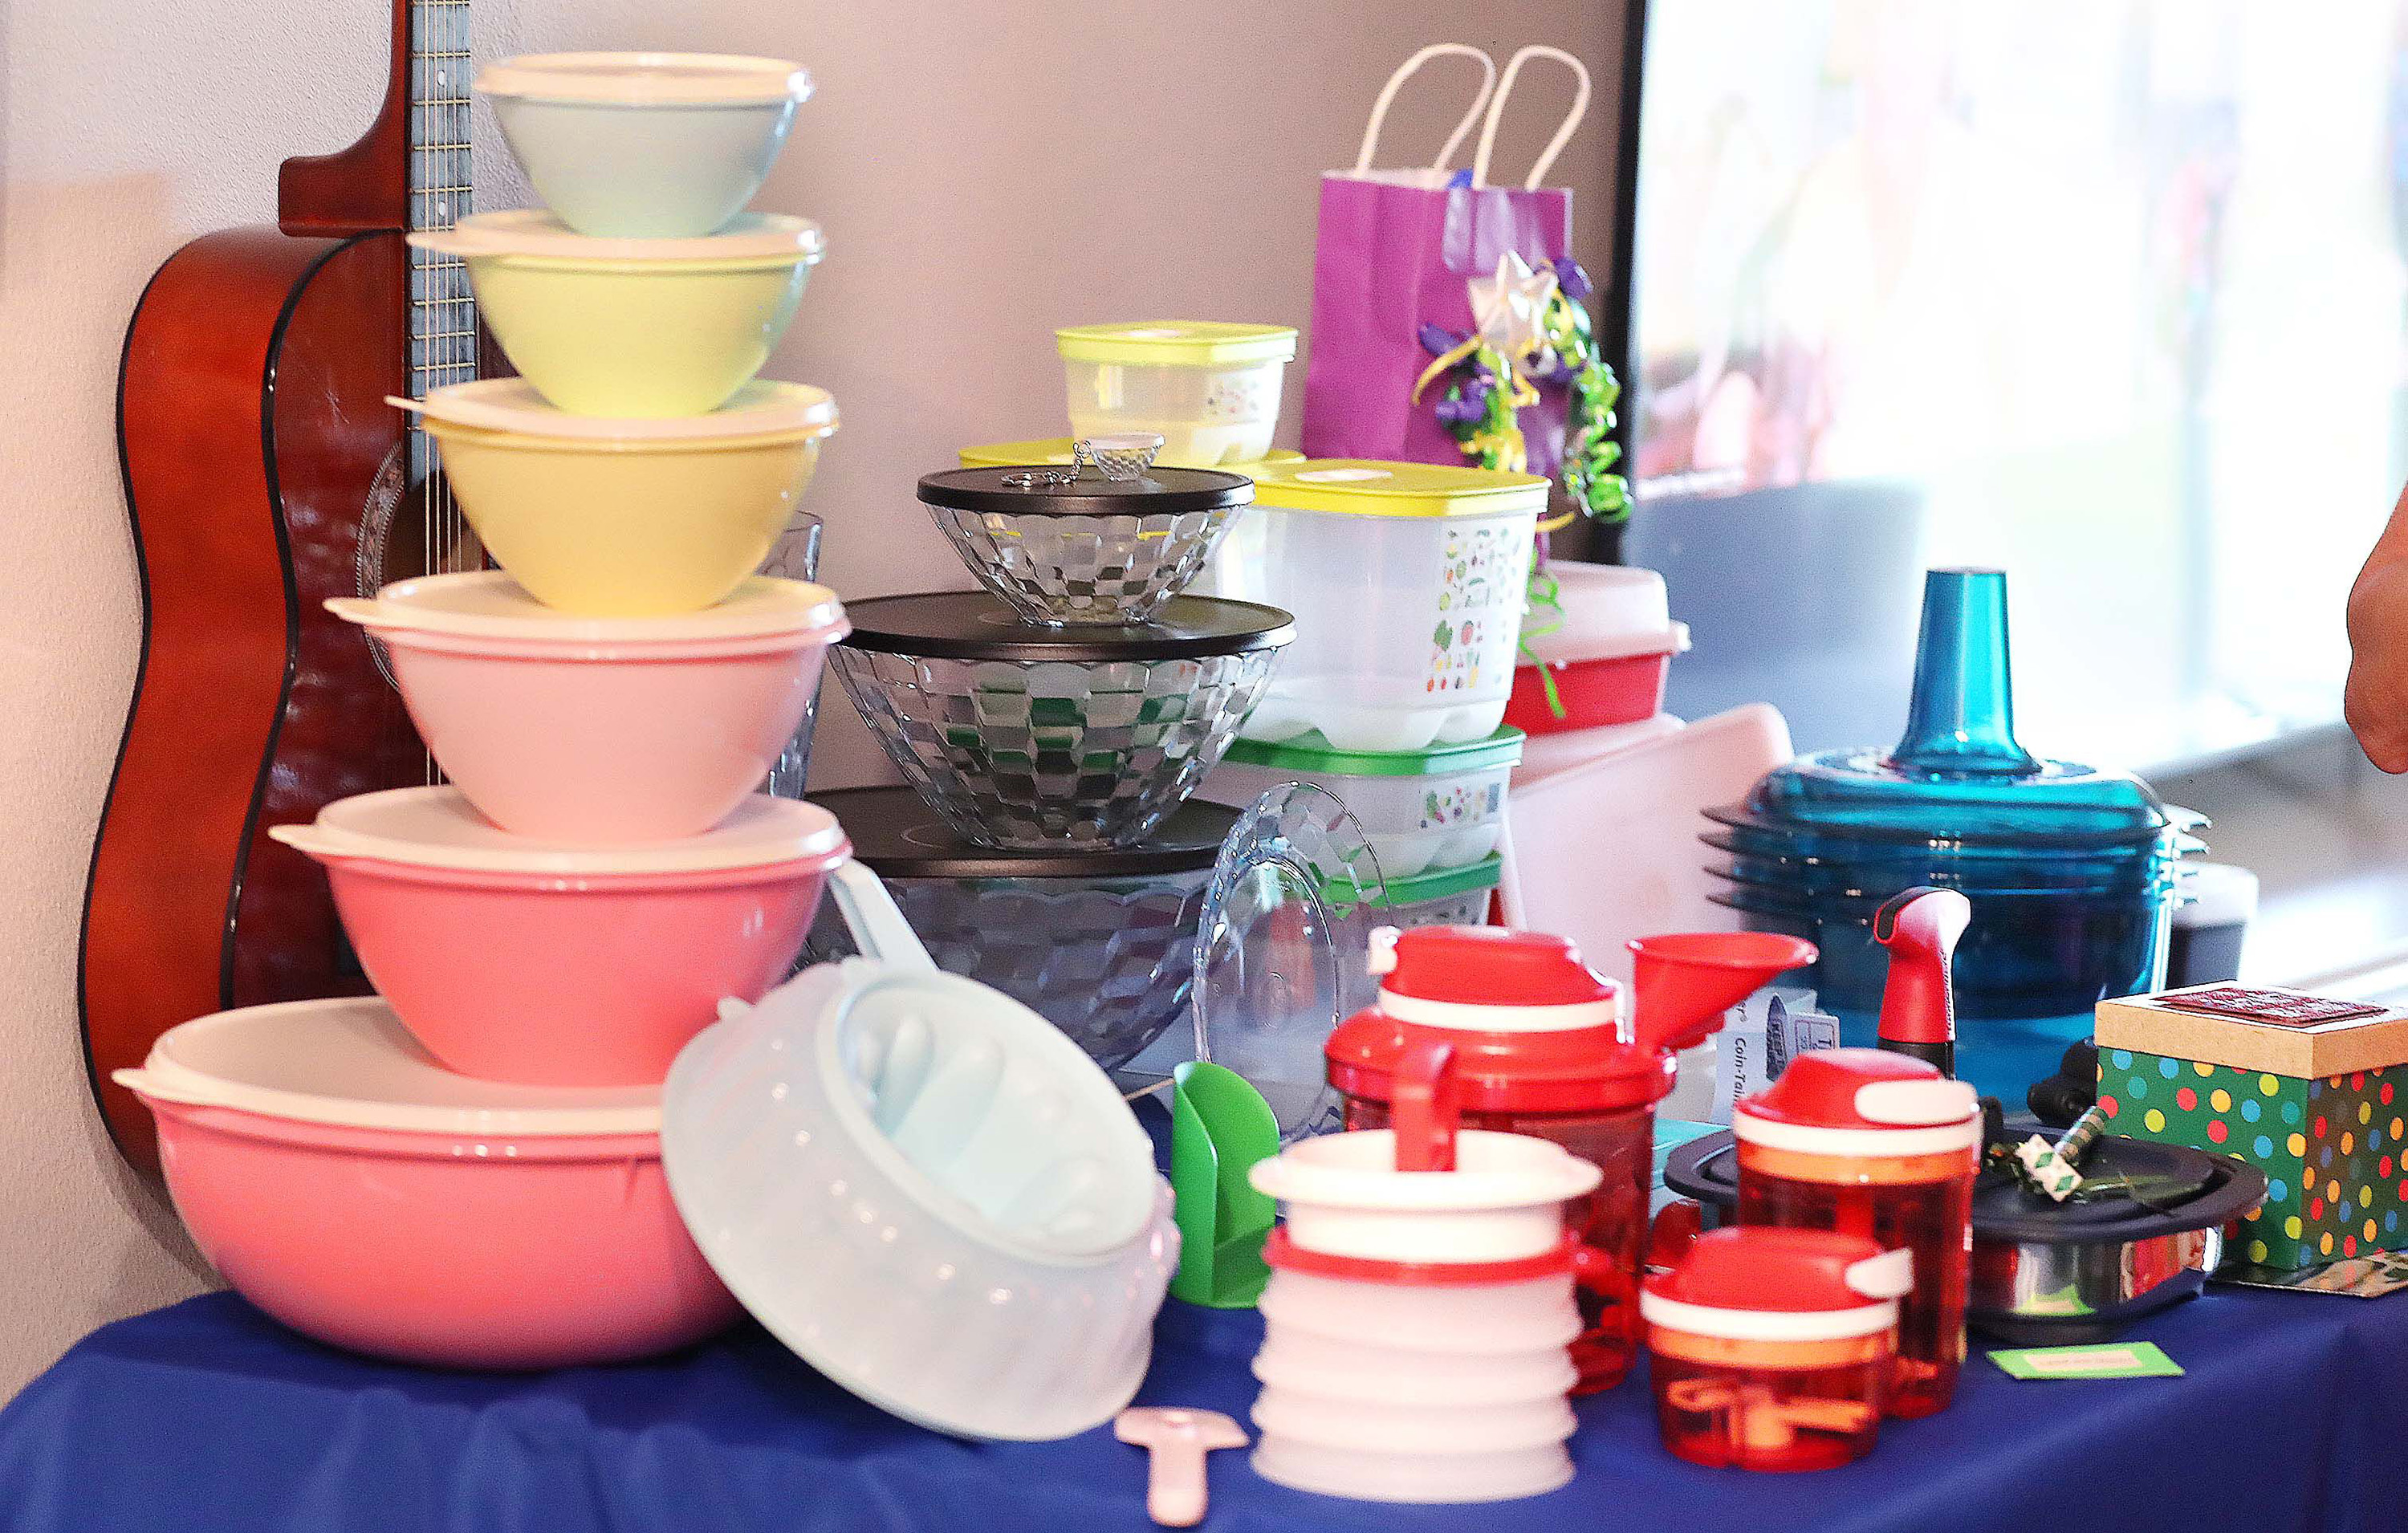 Korinne's Tupperware Party - The biggest Impressions bowl is not only  available right now, but it's also on sale at an unbelievable price! Get  the Extra Large 32-cup size right now for